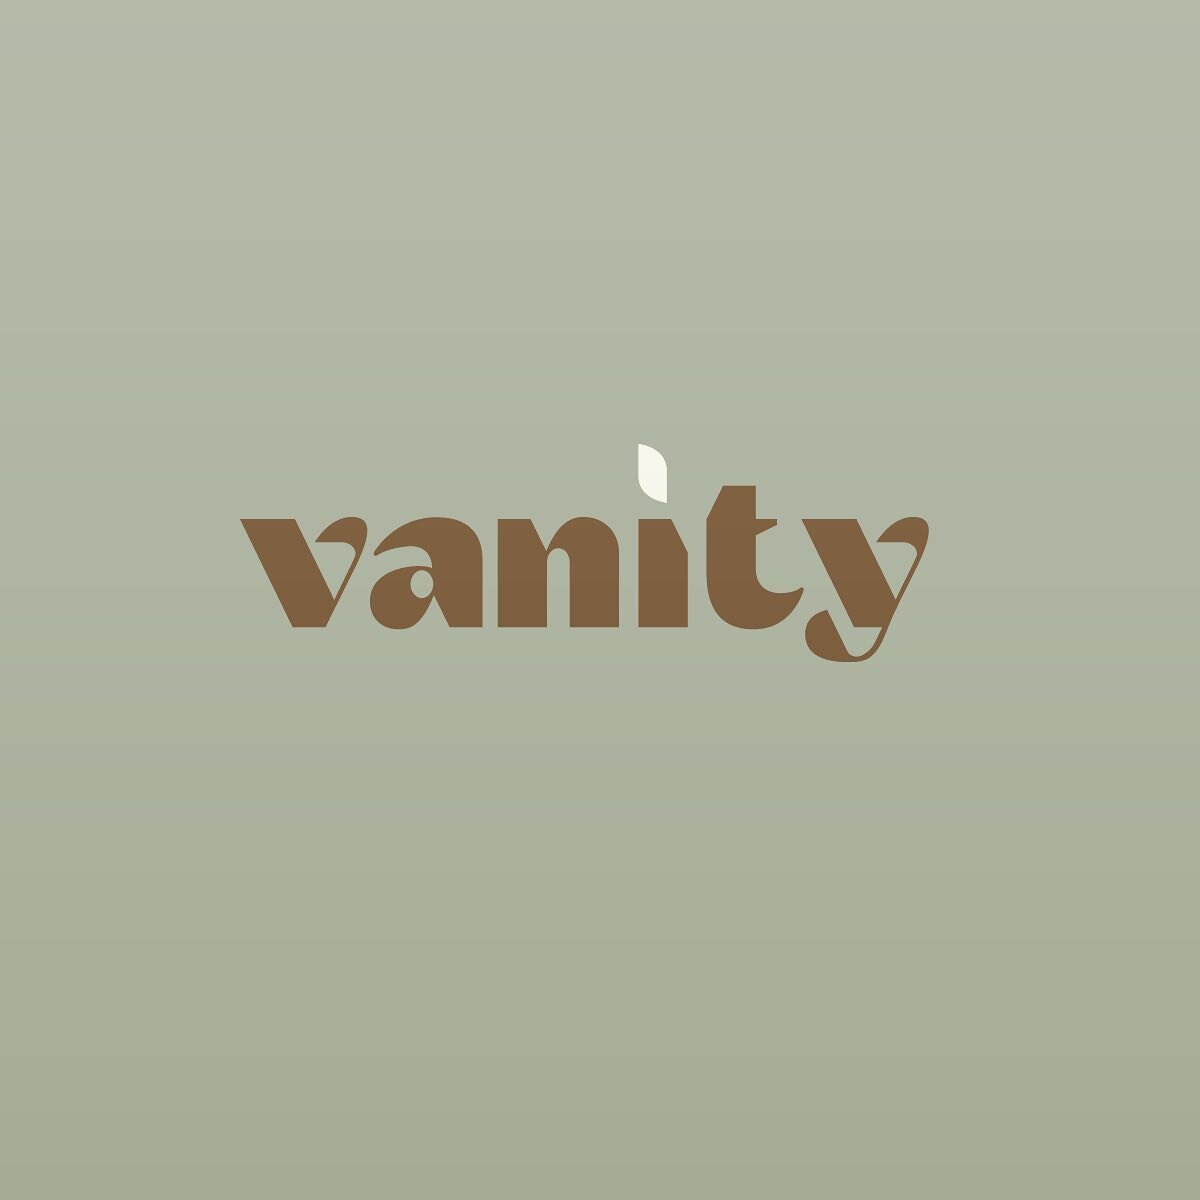 Vanity. Something That has been COVIDed out of me this past months. #backtobasics #hygeinehiatus .
.
#typography #typeinspiration #typedesign #lettering #typelove #itsnicethat #typedirectorsclub #logomark #wordmark #logodesigner #logoinspirations #ty